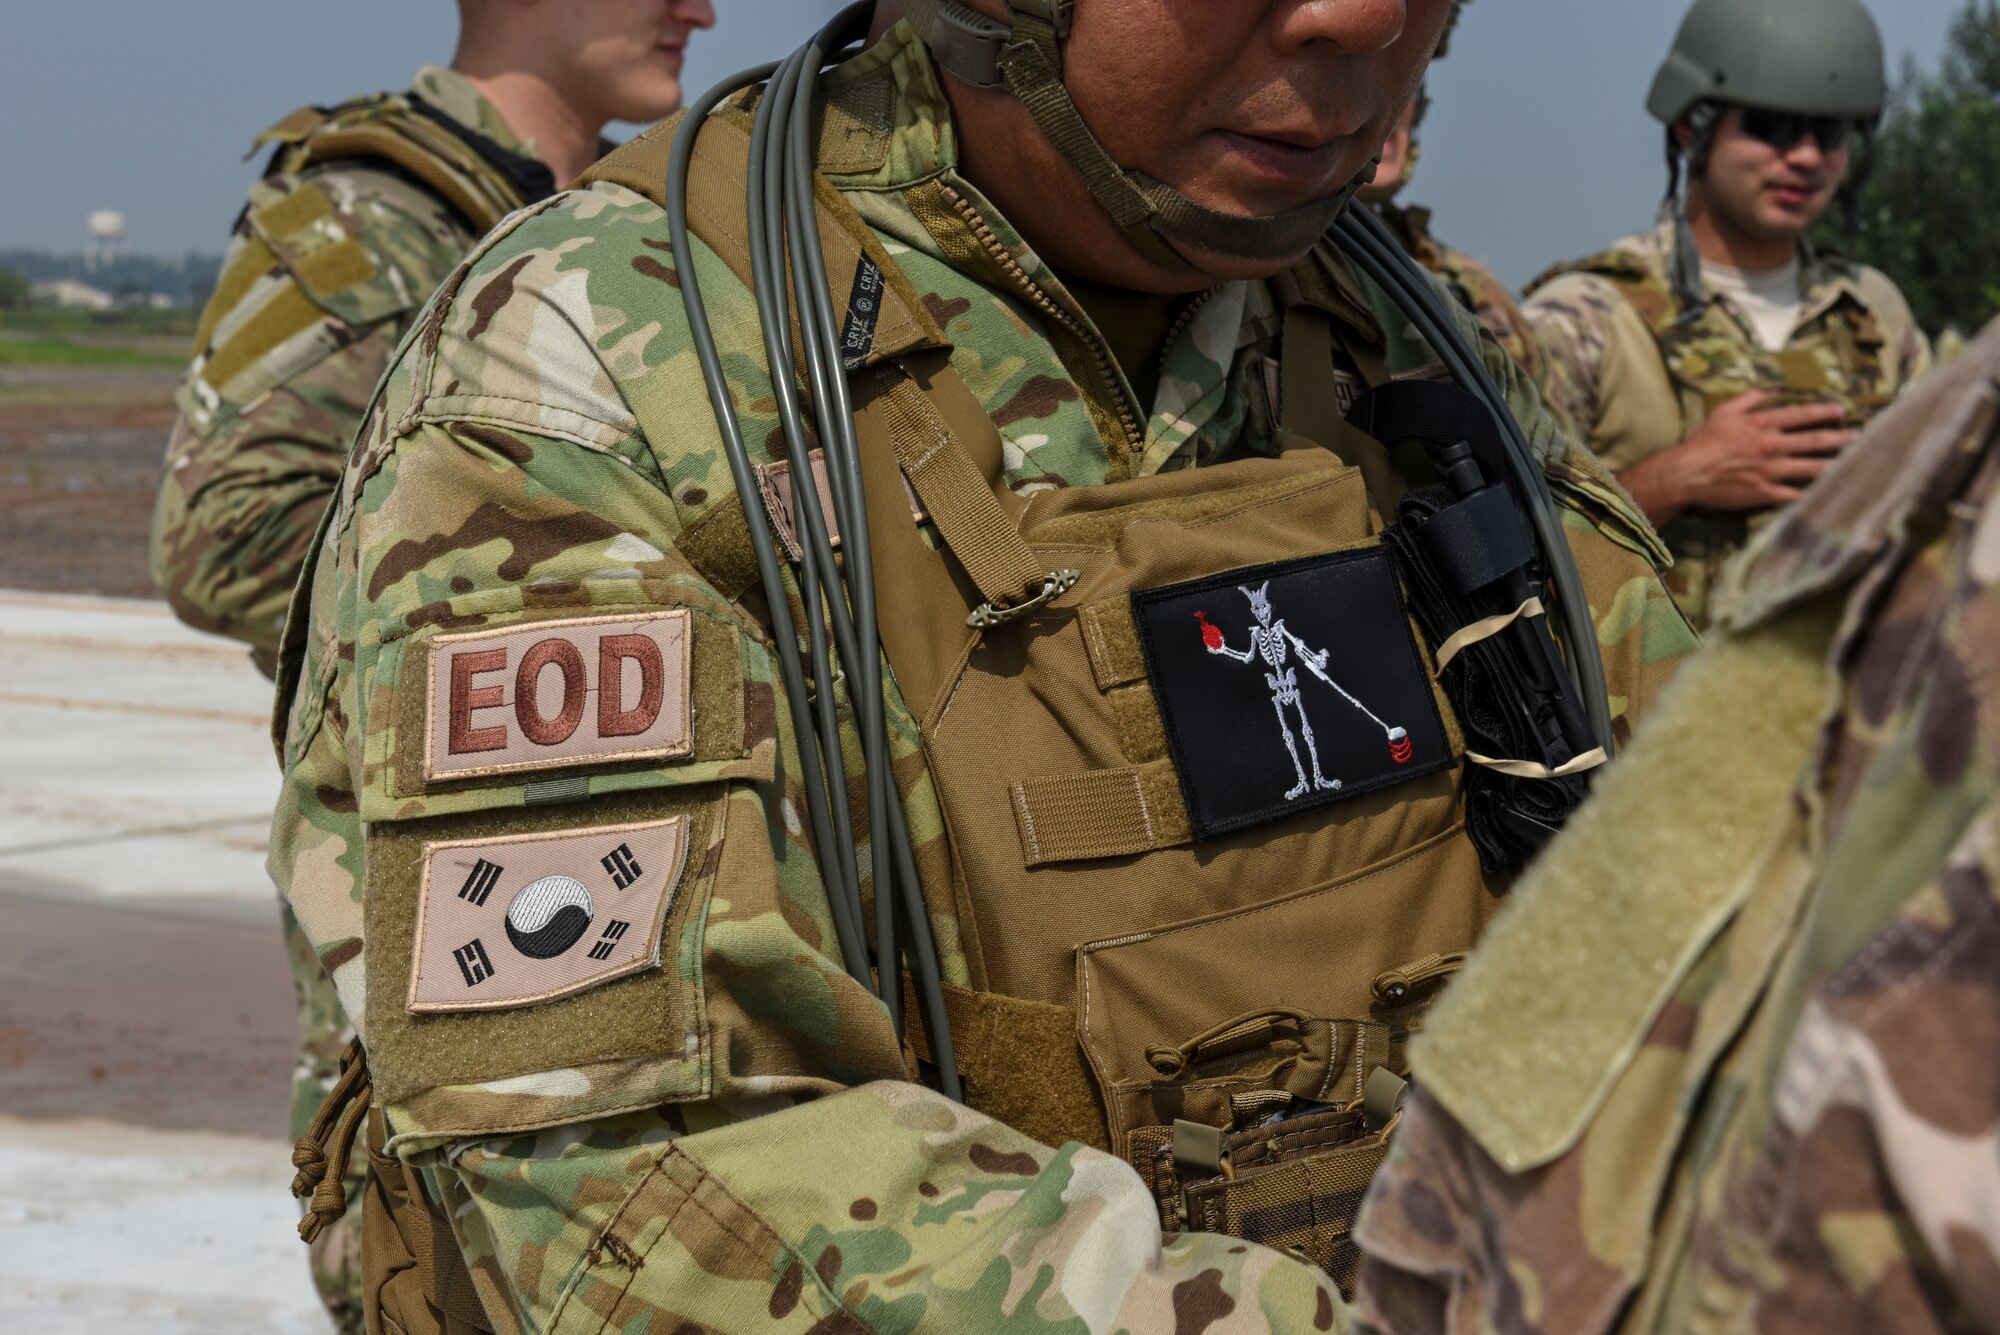 The 38th Fighter Group Explosive Ordnance Disposal unit partnered with the 8th Civil Engineer Squadron EOD unit to train on disposing of ordnance in the field at Kunsan Air Base, Republic of Korea, Aug. 22, 2019. More than 20 Airmen from the two units participated in the joint training, which challenged the EOD units to demonstrate how to properly dispose of unexploded ordnance in various settings. (U.S. Air Force photo by Staff Sgt. Mackenzie Mendez)